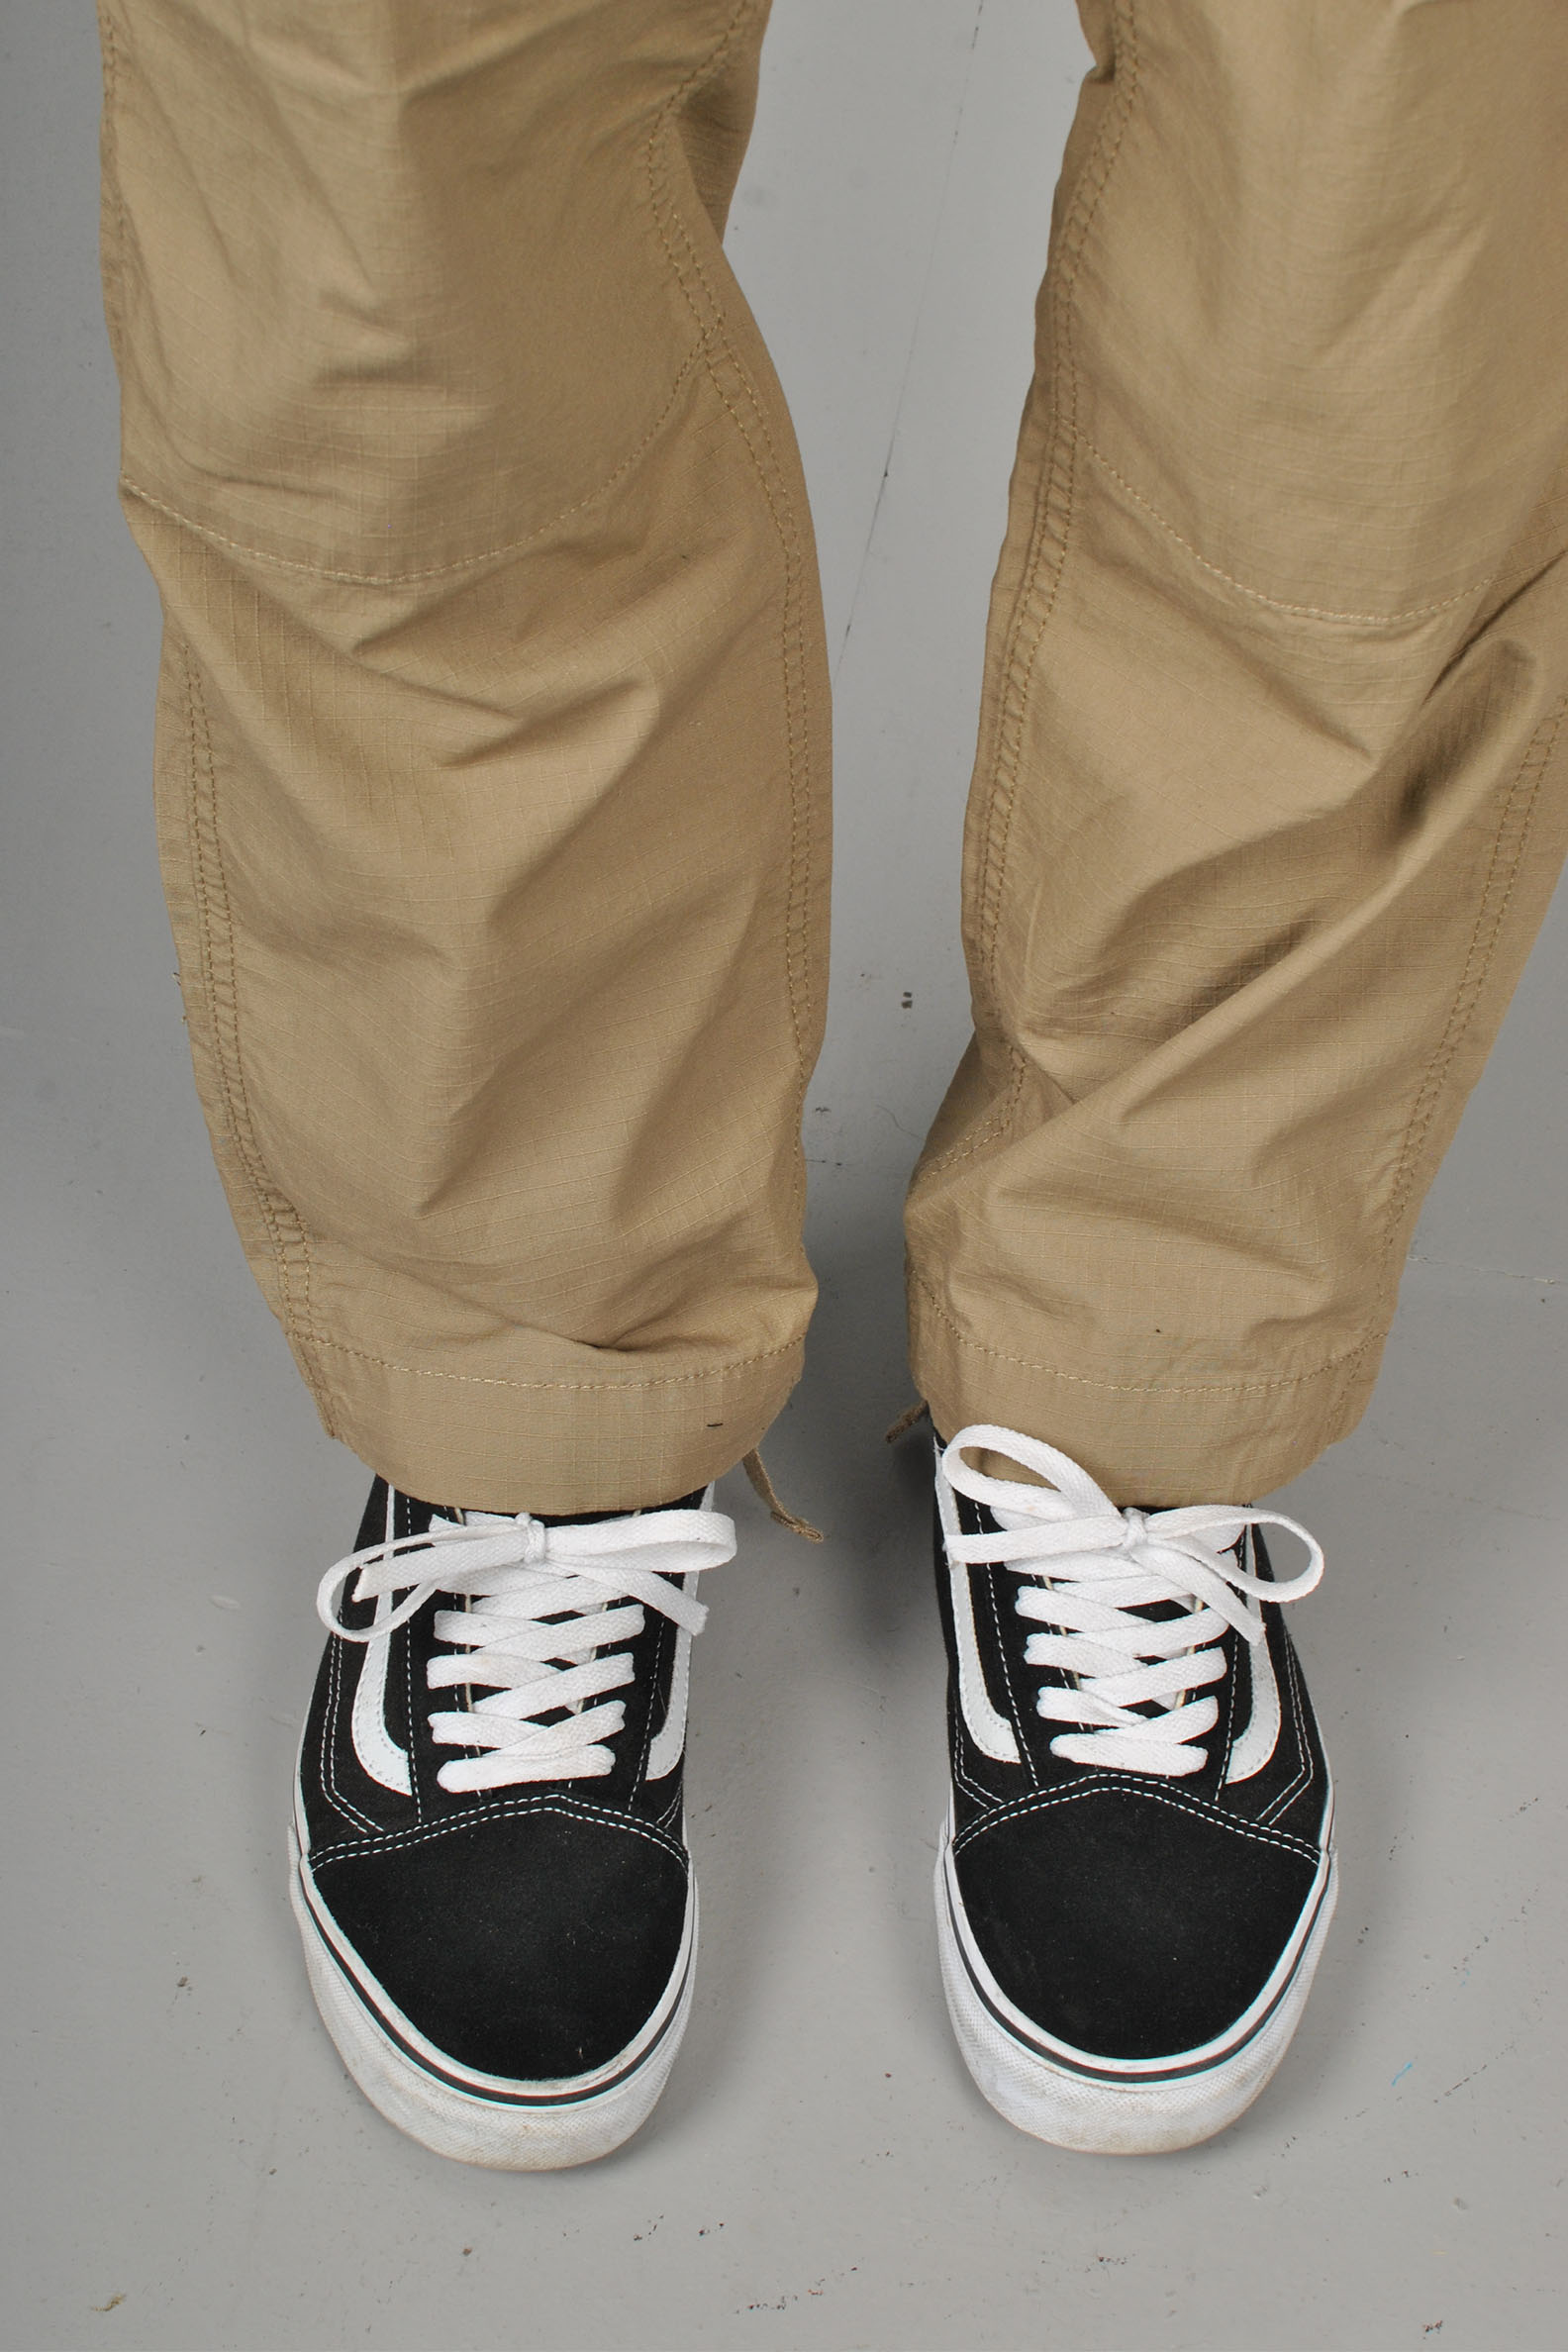 Regular Cargo Pant, Leather Rinsed/Ripstop